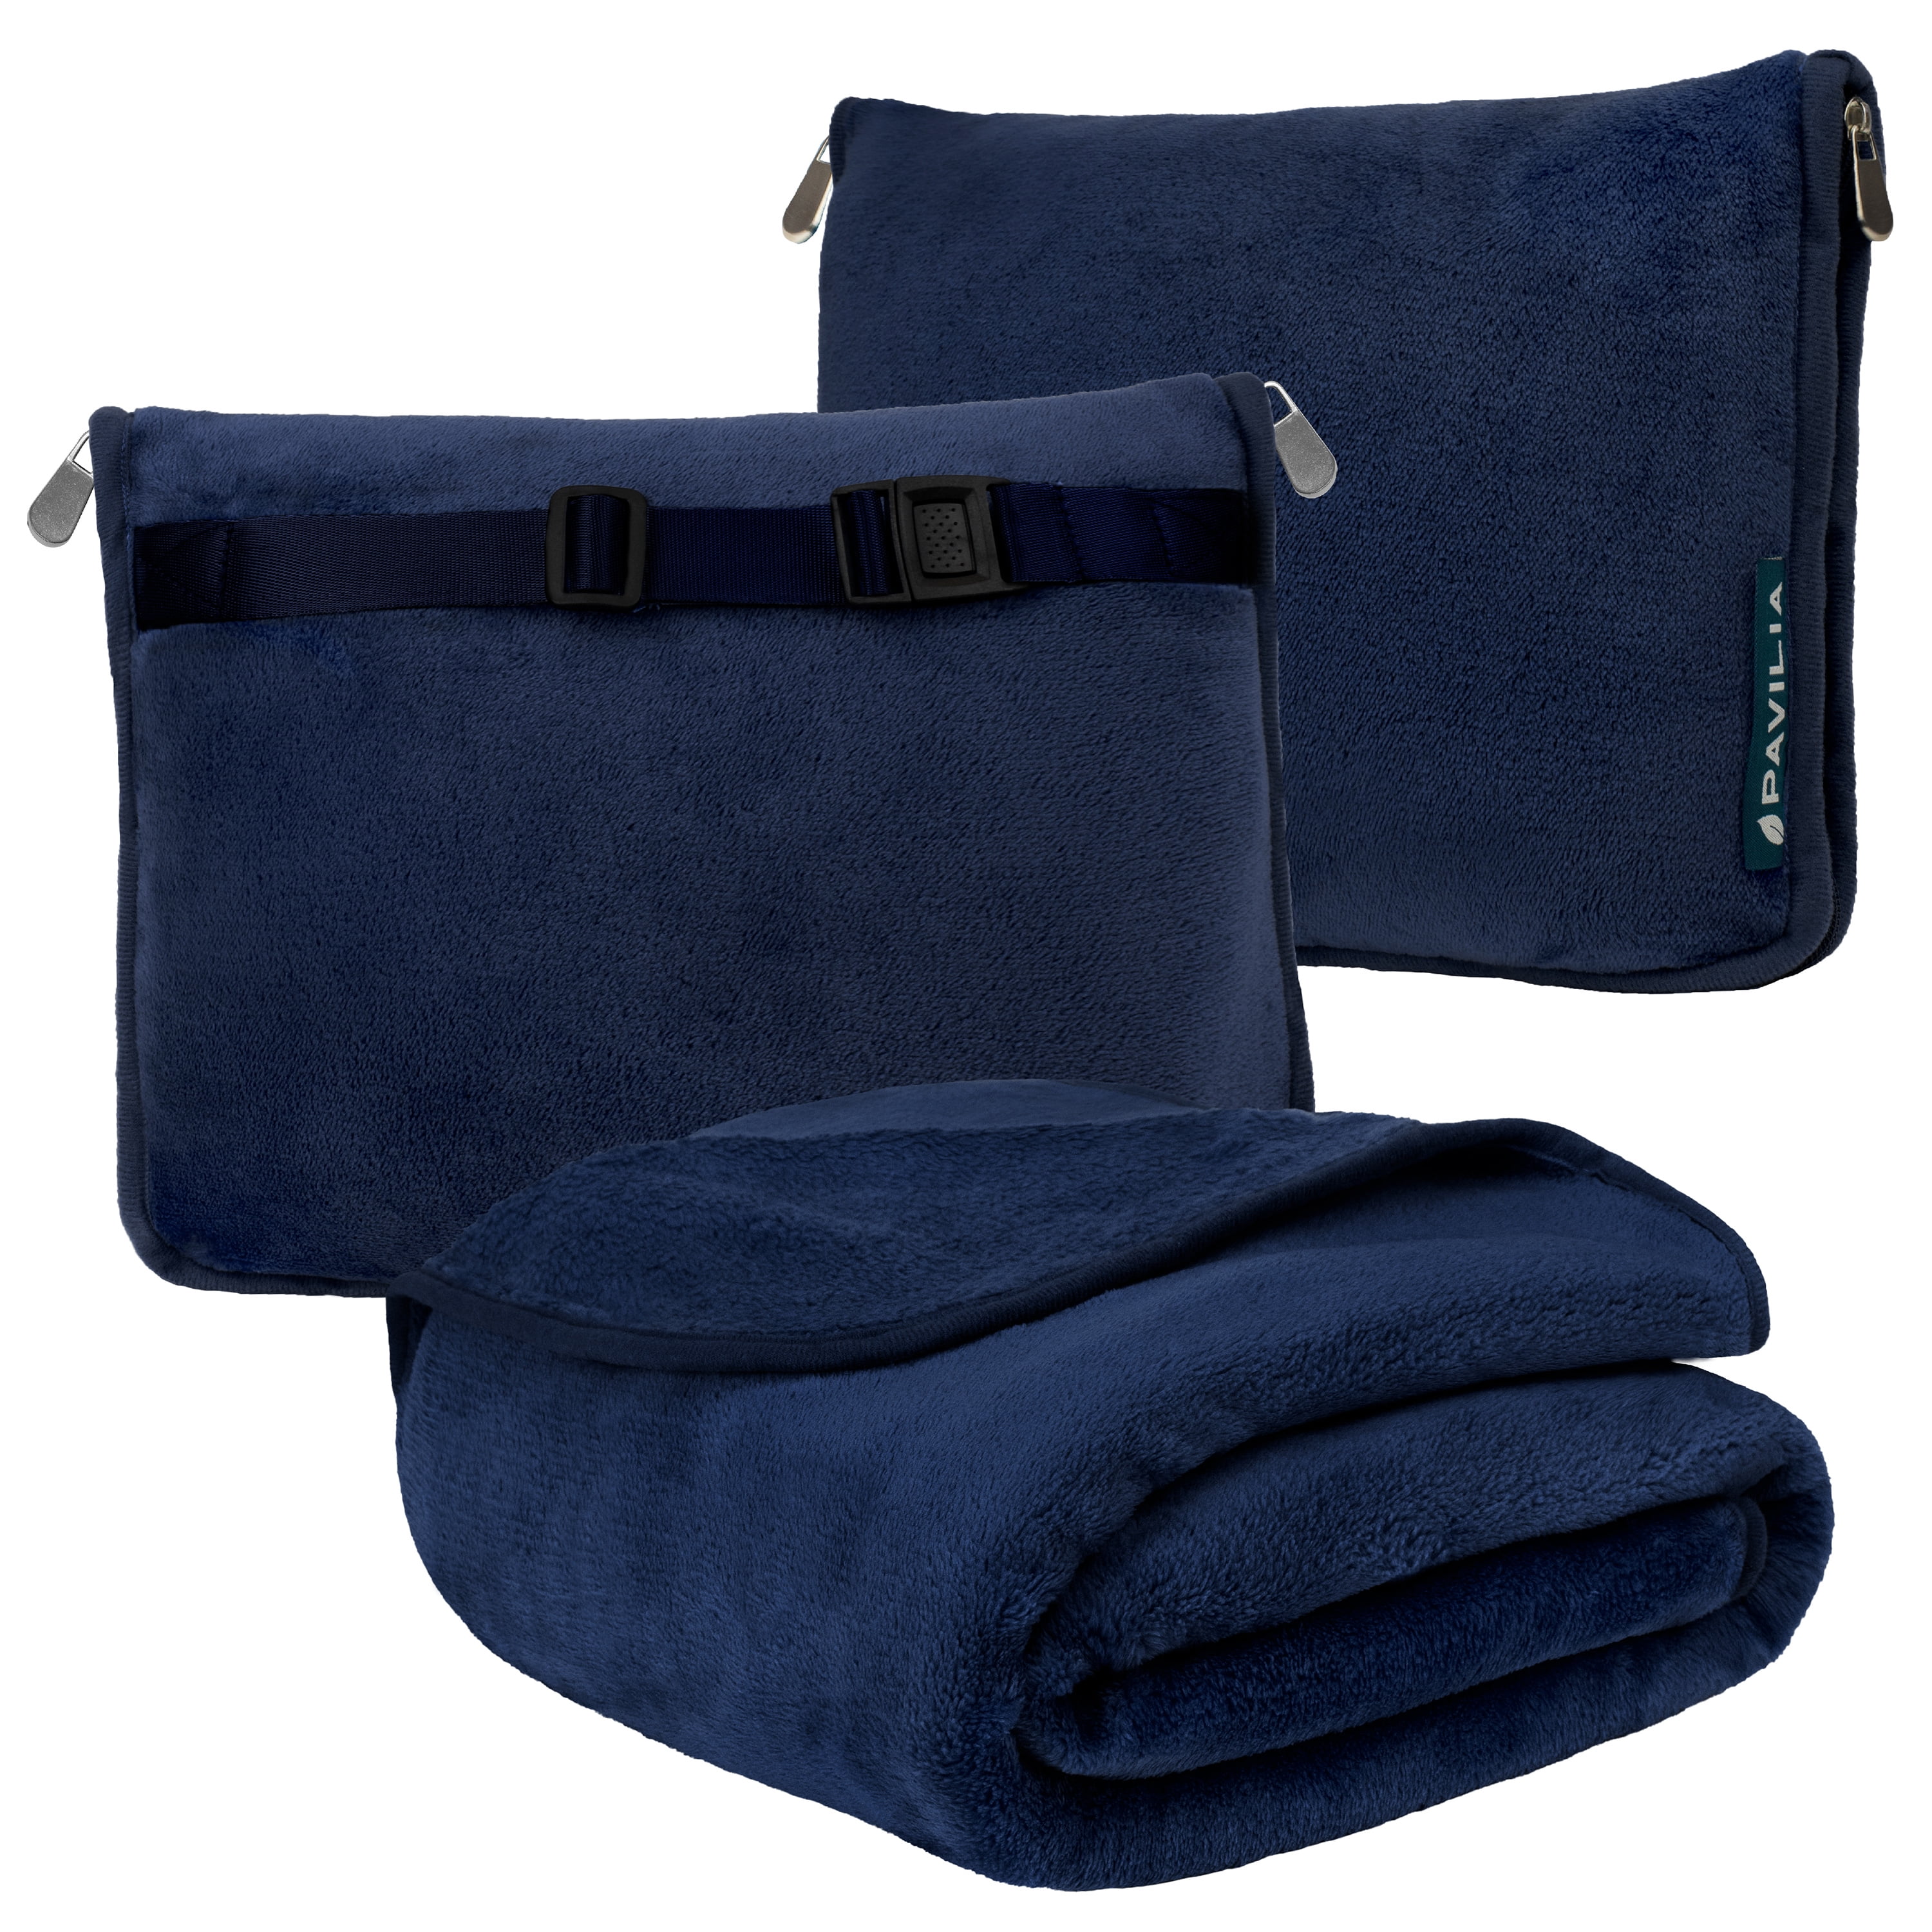 PAVILIA Travel Blanket and Pillow Set, Airplane Blanket Compact 2-in-1 Soft  Bag, Travel Essentials for Adult Flight, Portable Throw with Arm Hole,  Plane Car Traveling Gift Accessories, Navy Blue 